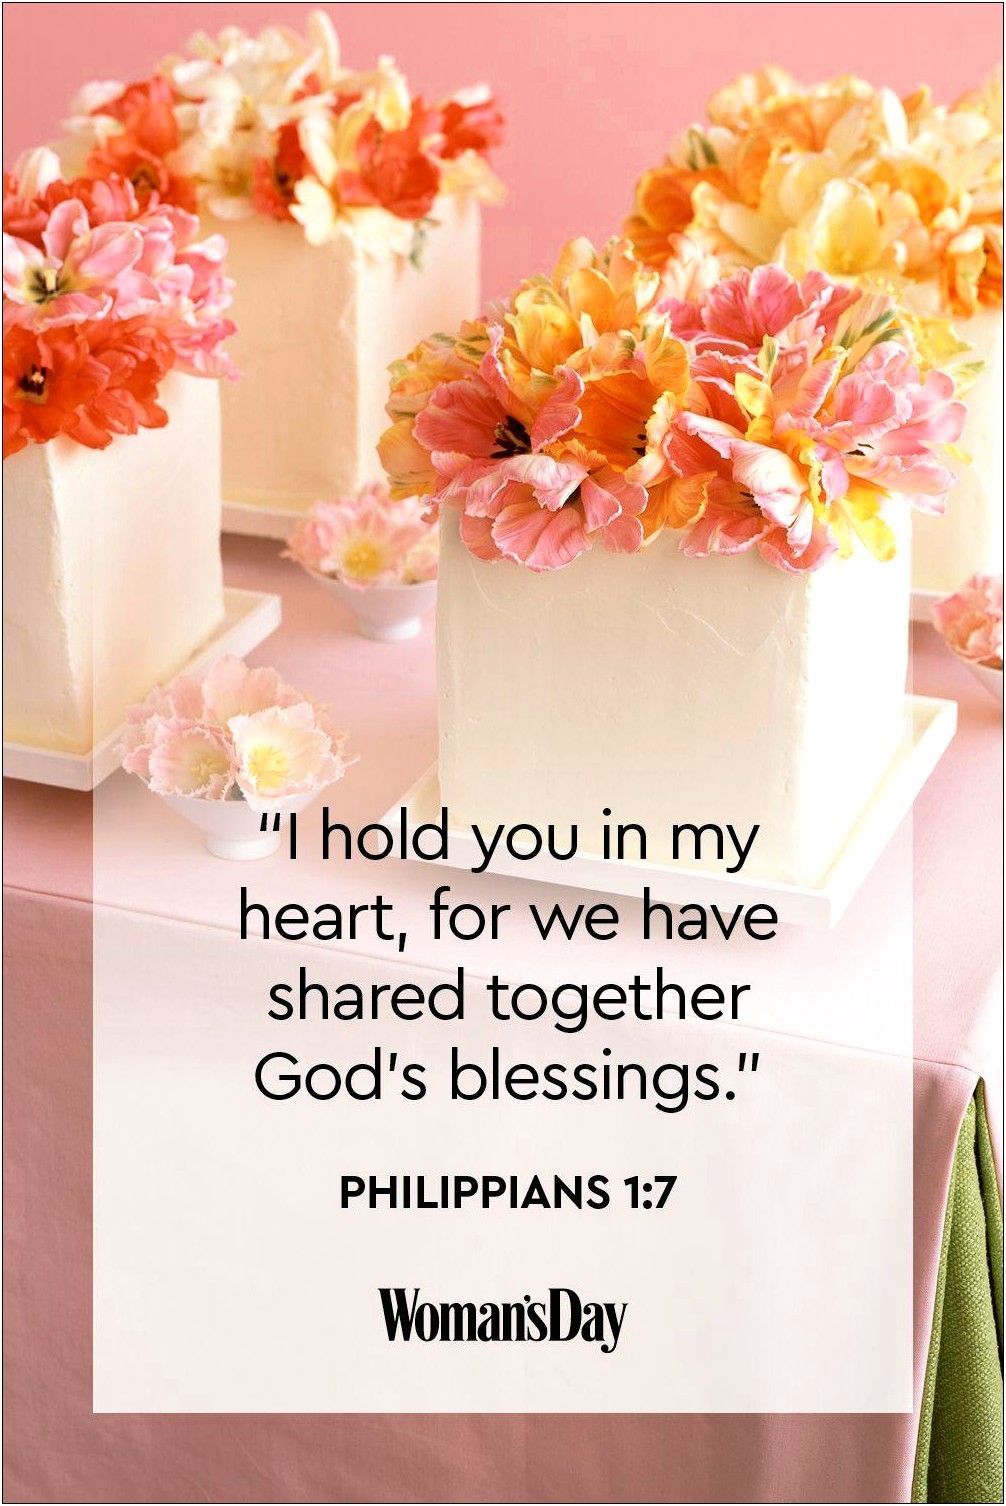 Wedding Invitation Bible Verses And Quotes